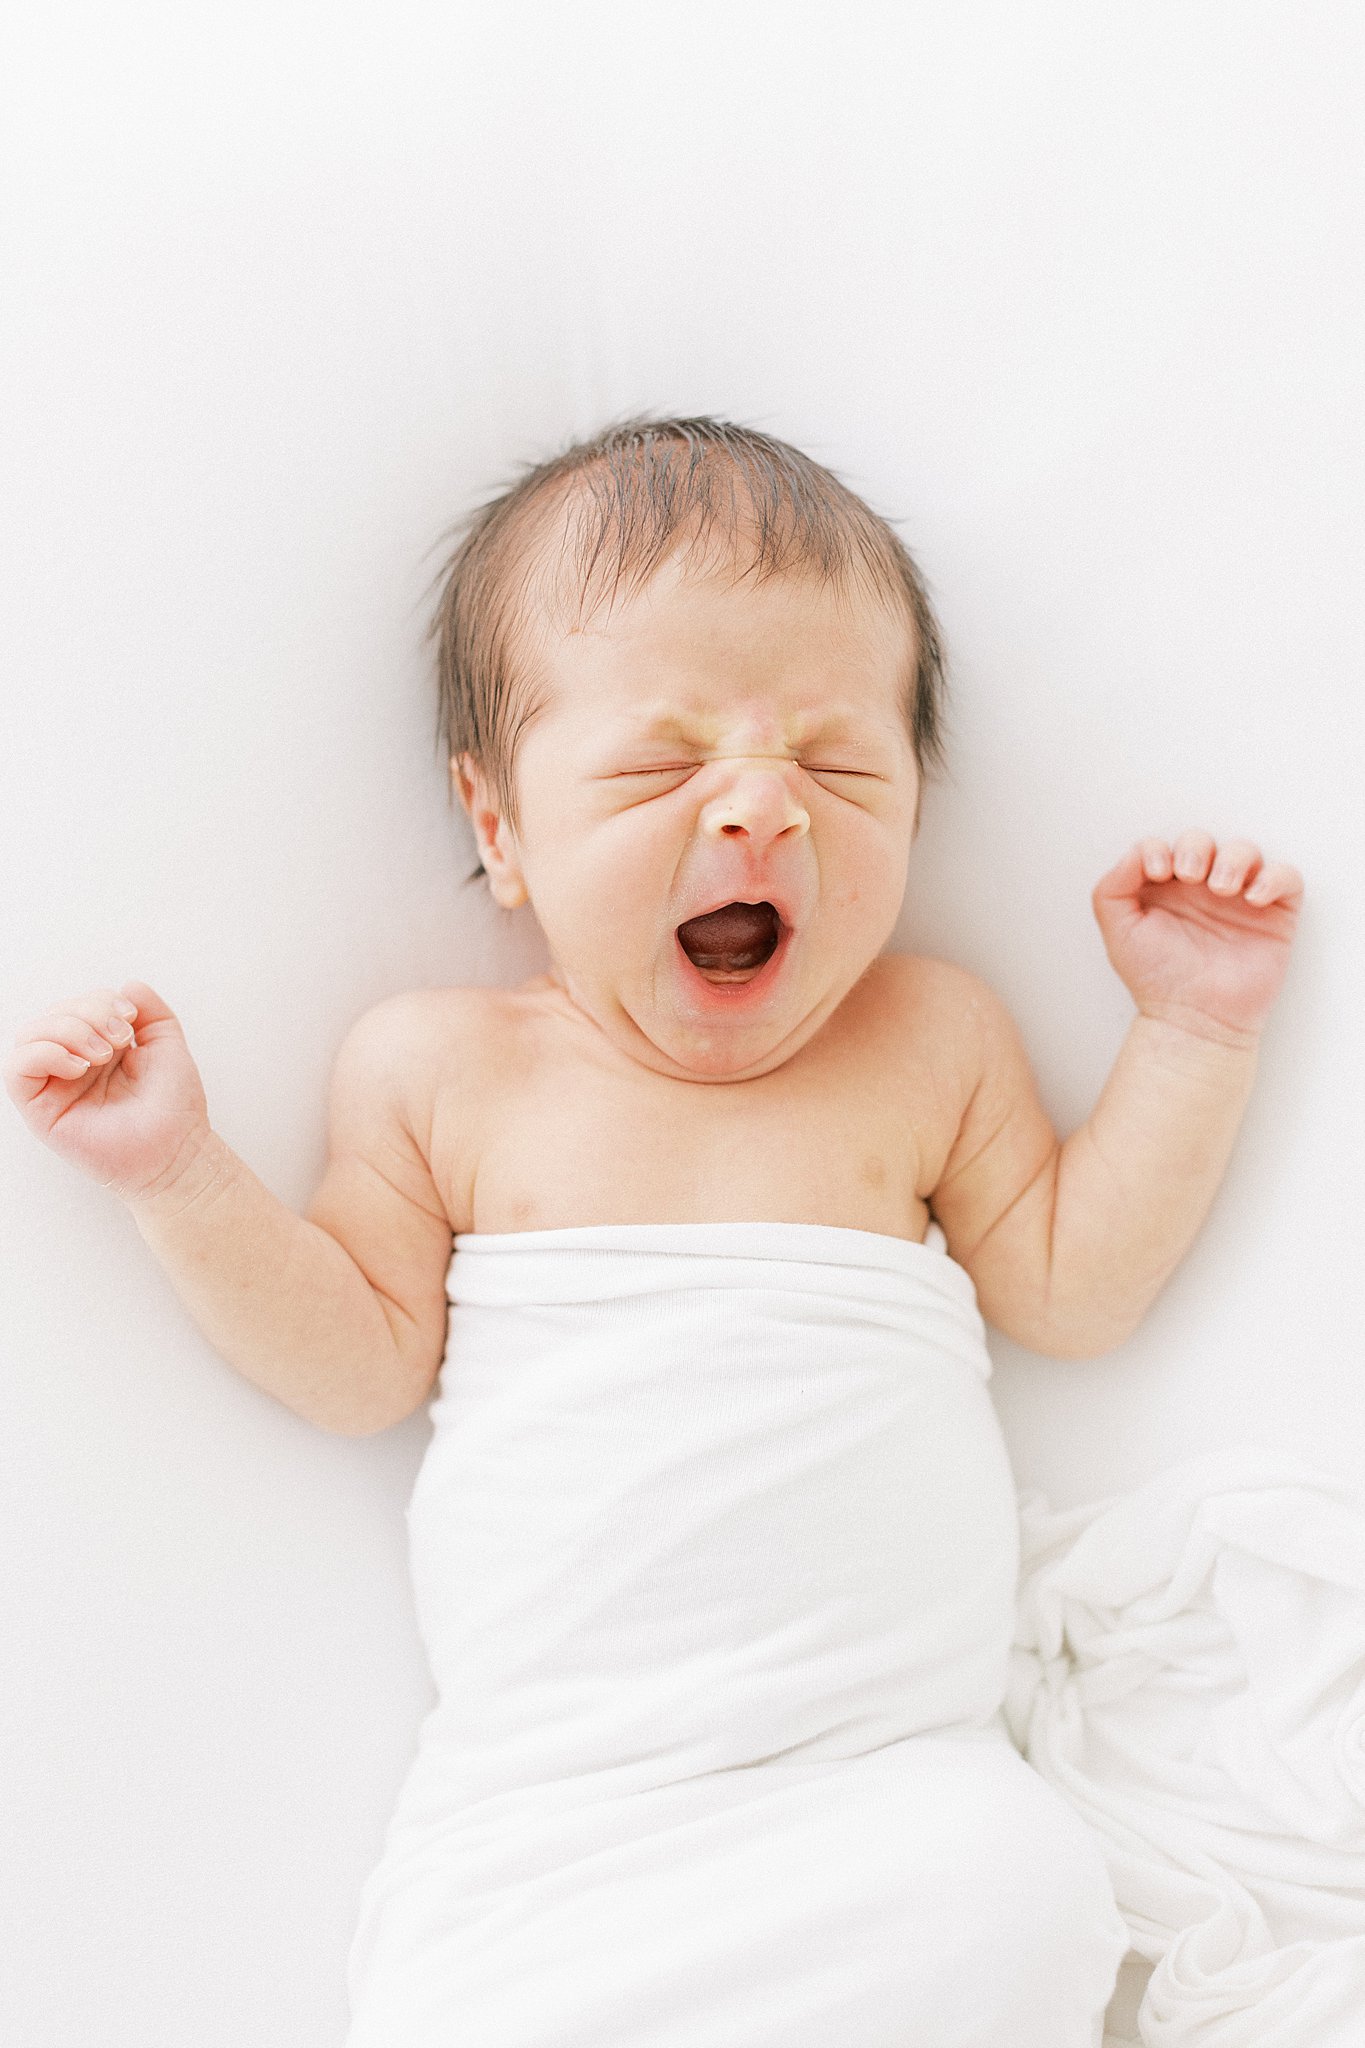 A newborn baby in a white blanket lets out a large yawn Dallas lactation consultant